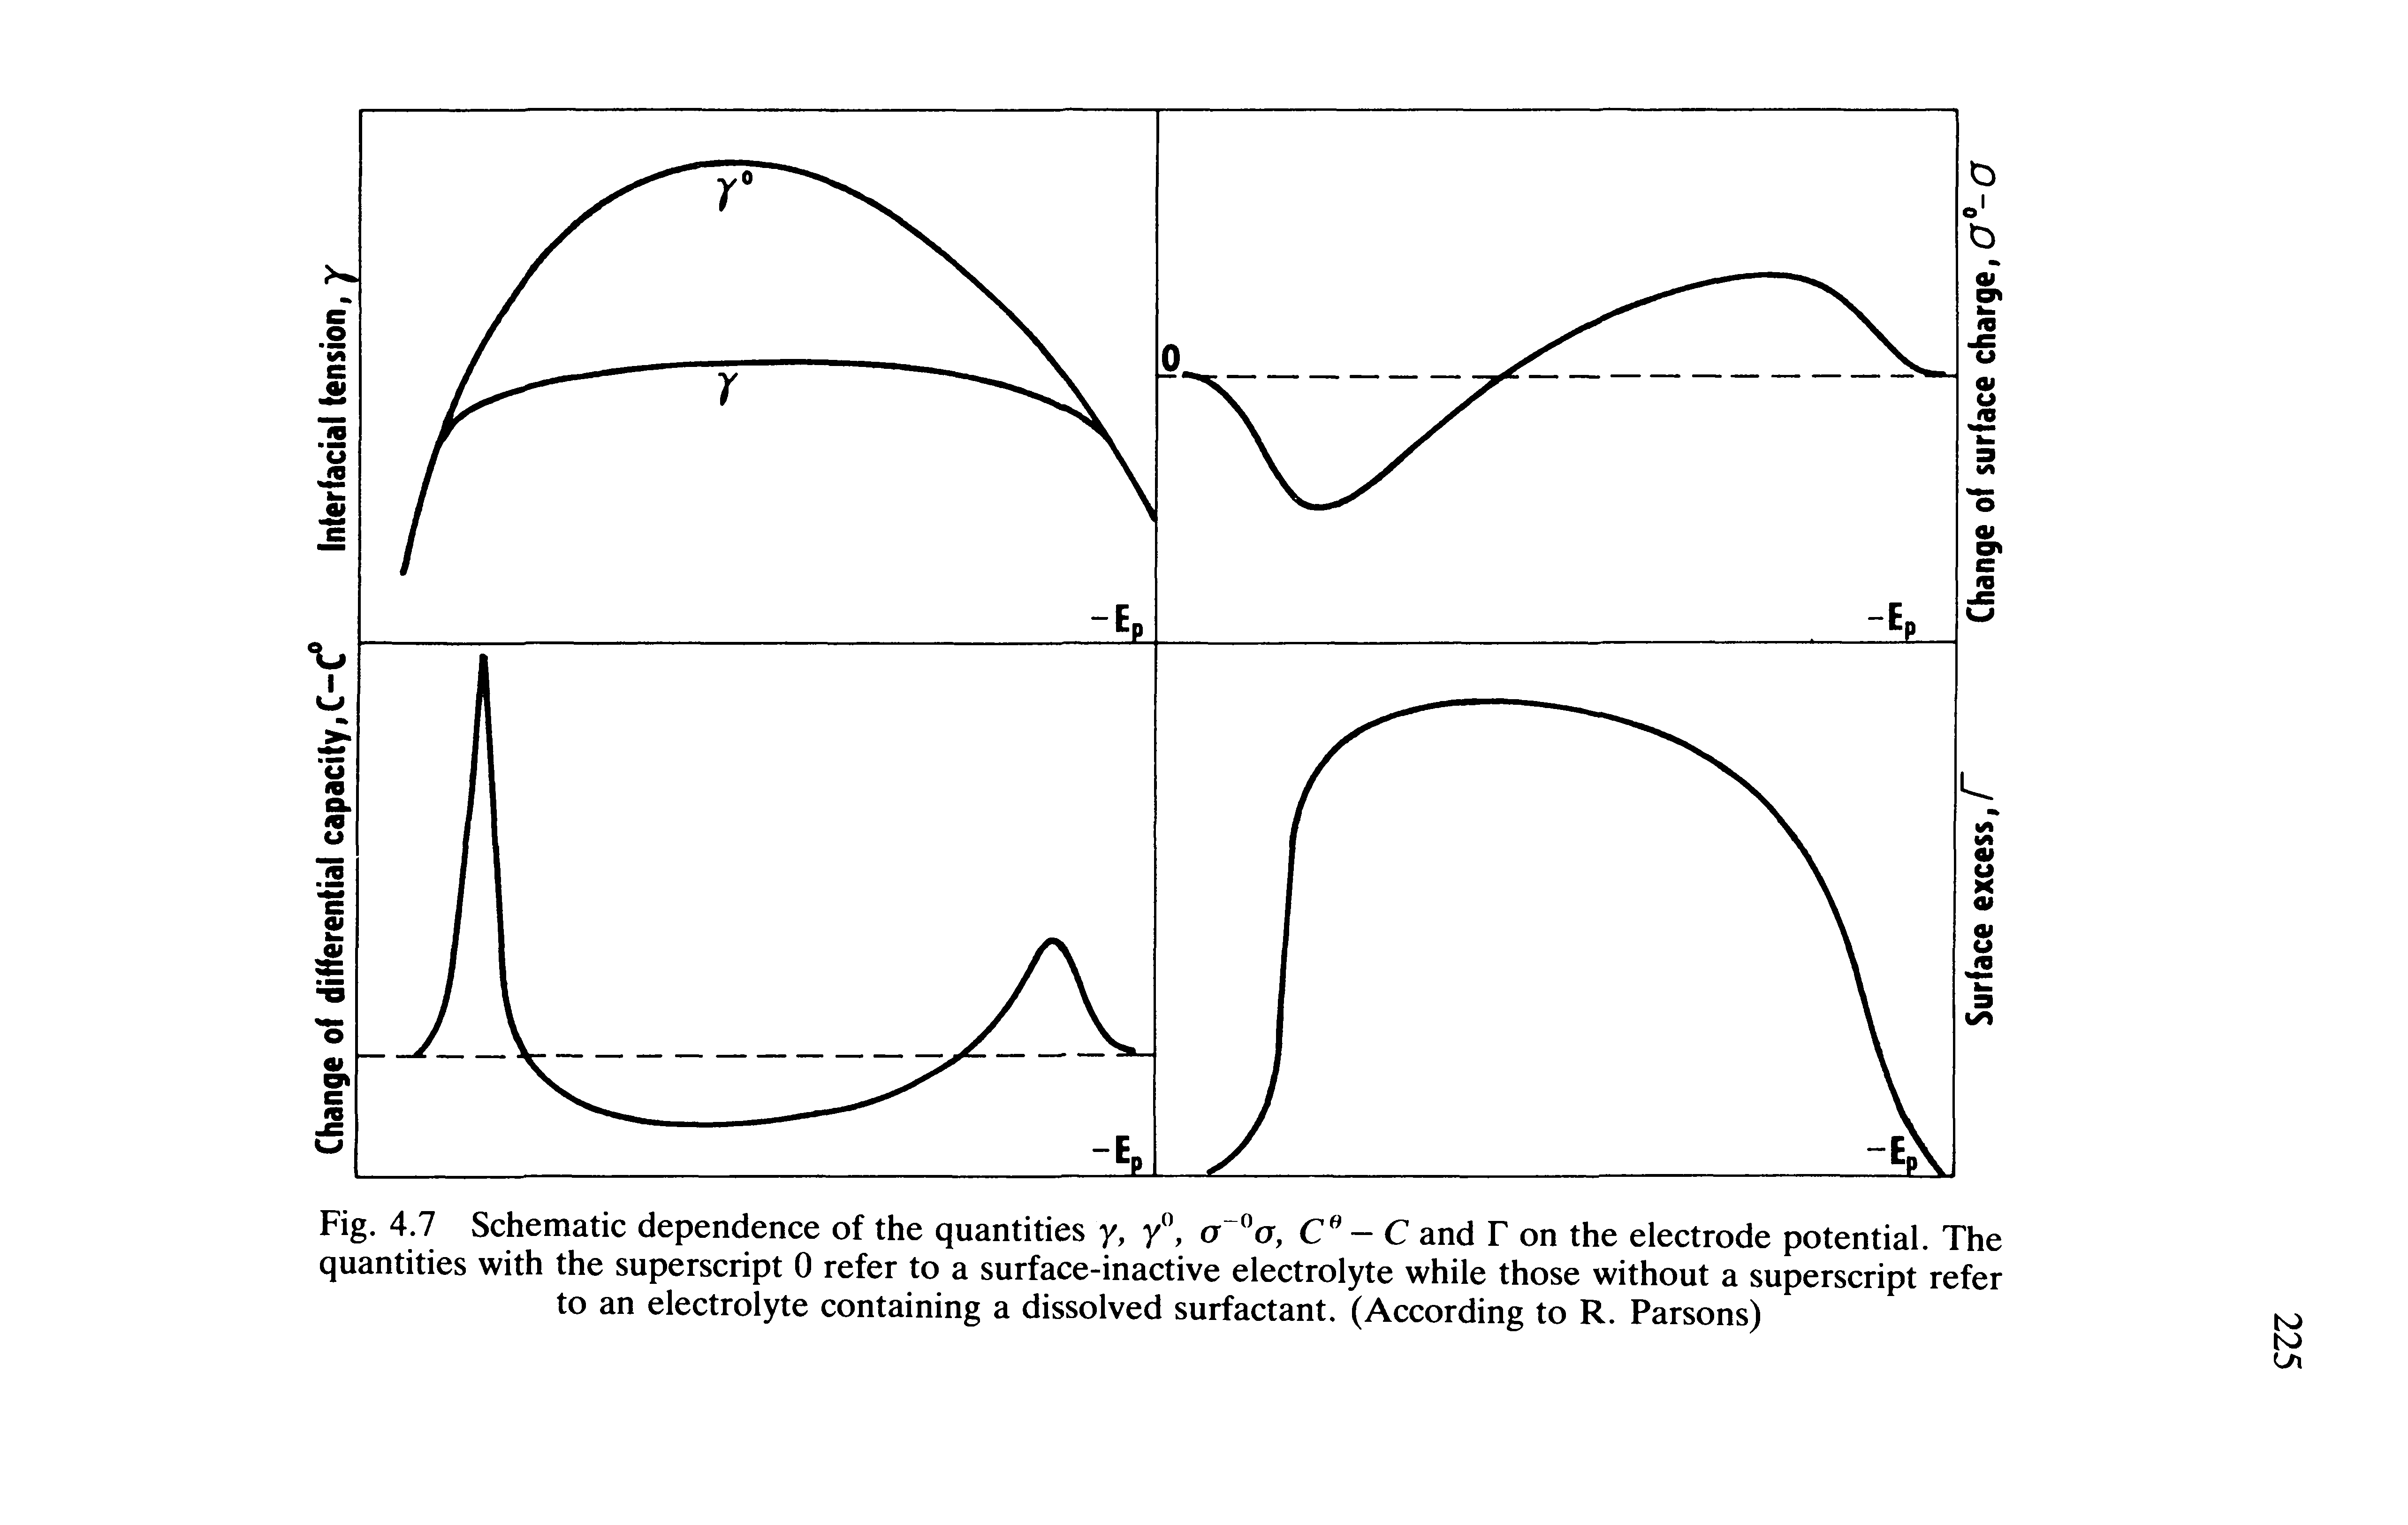 Fig. 4.7 Schematic dependence of the quantities y, y°, o °o, Ce — C and T on the electrode potential. The quantities with the superscript 0 refer to a surface-inactive electrolyte while those without a superscript refer...